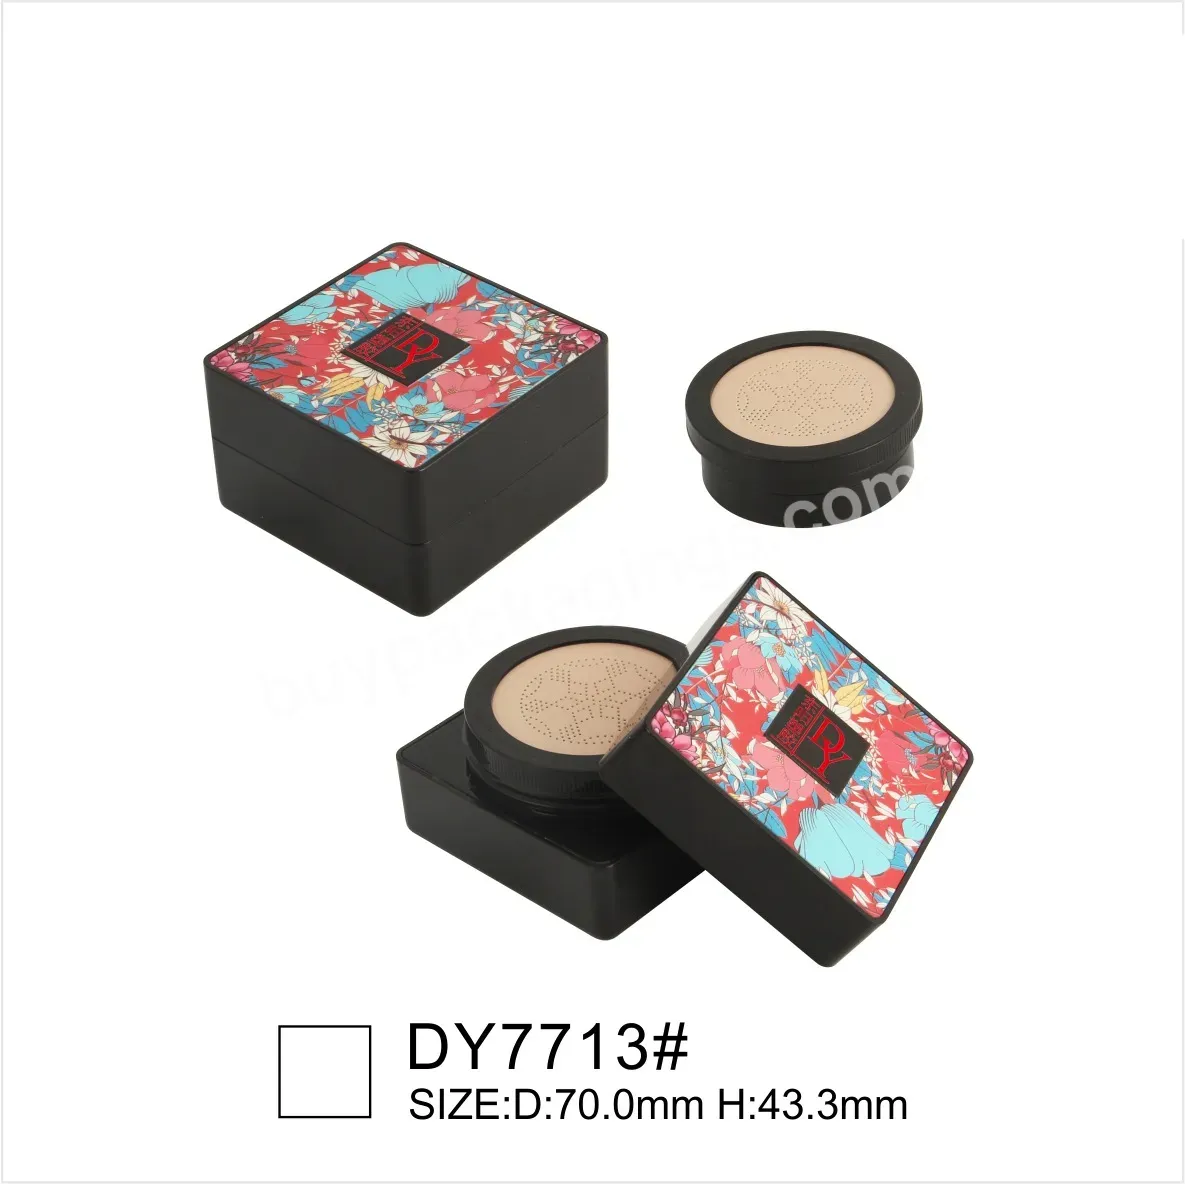 Private Label 7713# Hot Mushroom Head Foundation Replacement Square Air Cushion Bb Cc Empty Container Case Packaging - Buy Air Cushion Container,Air Cushion Bb Cc Packaging,Foundation Container Packaging.